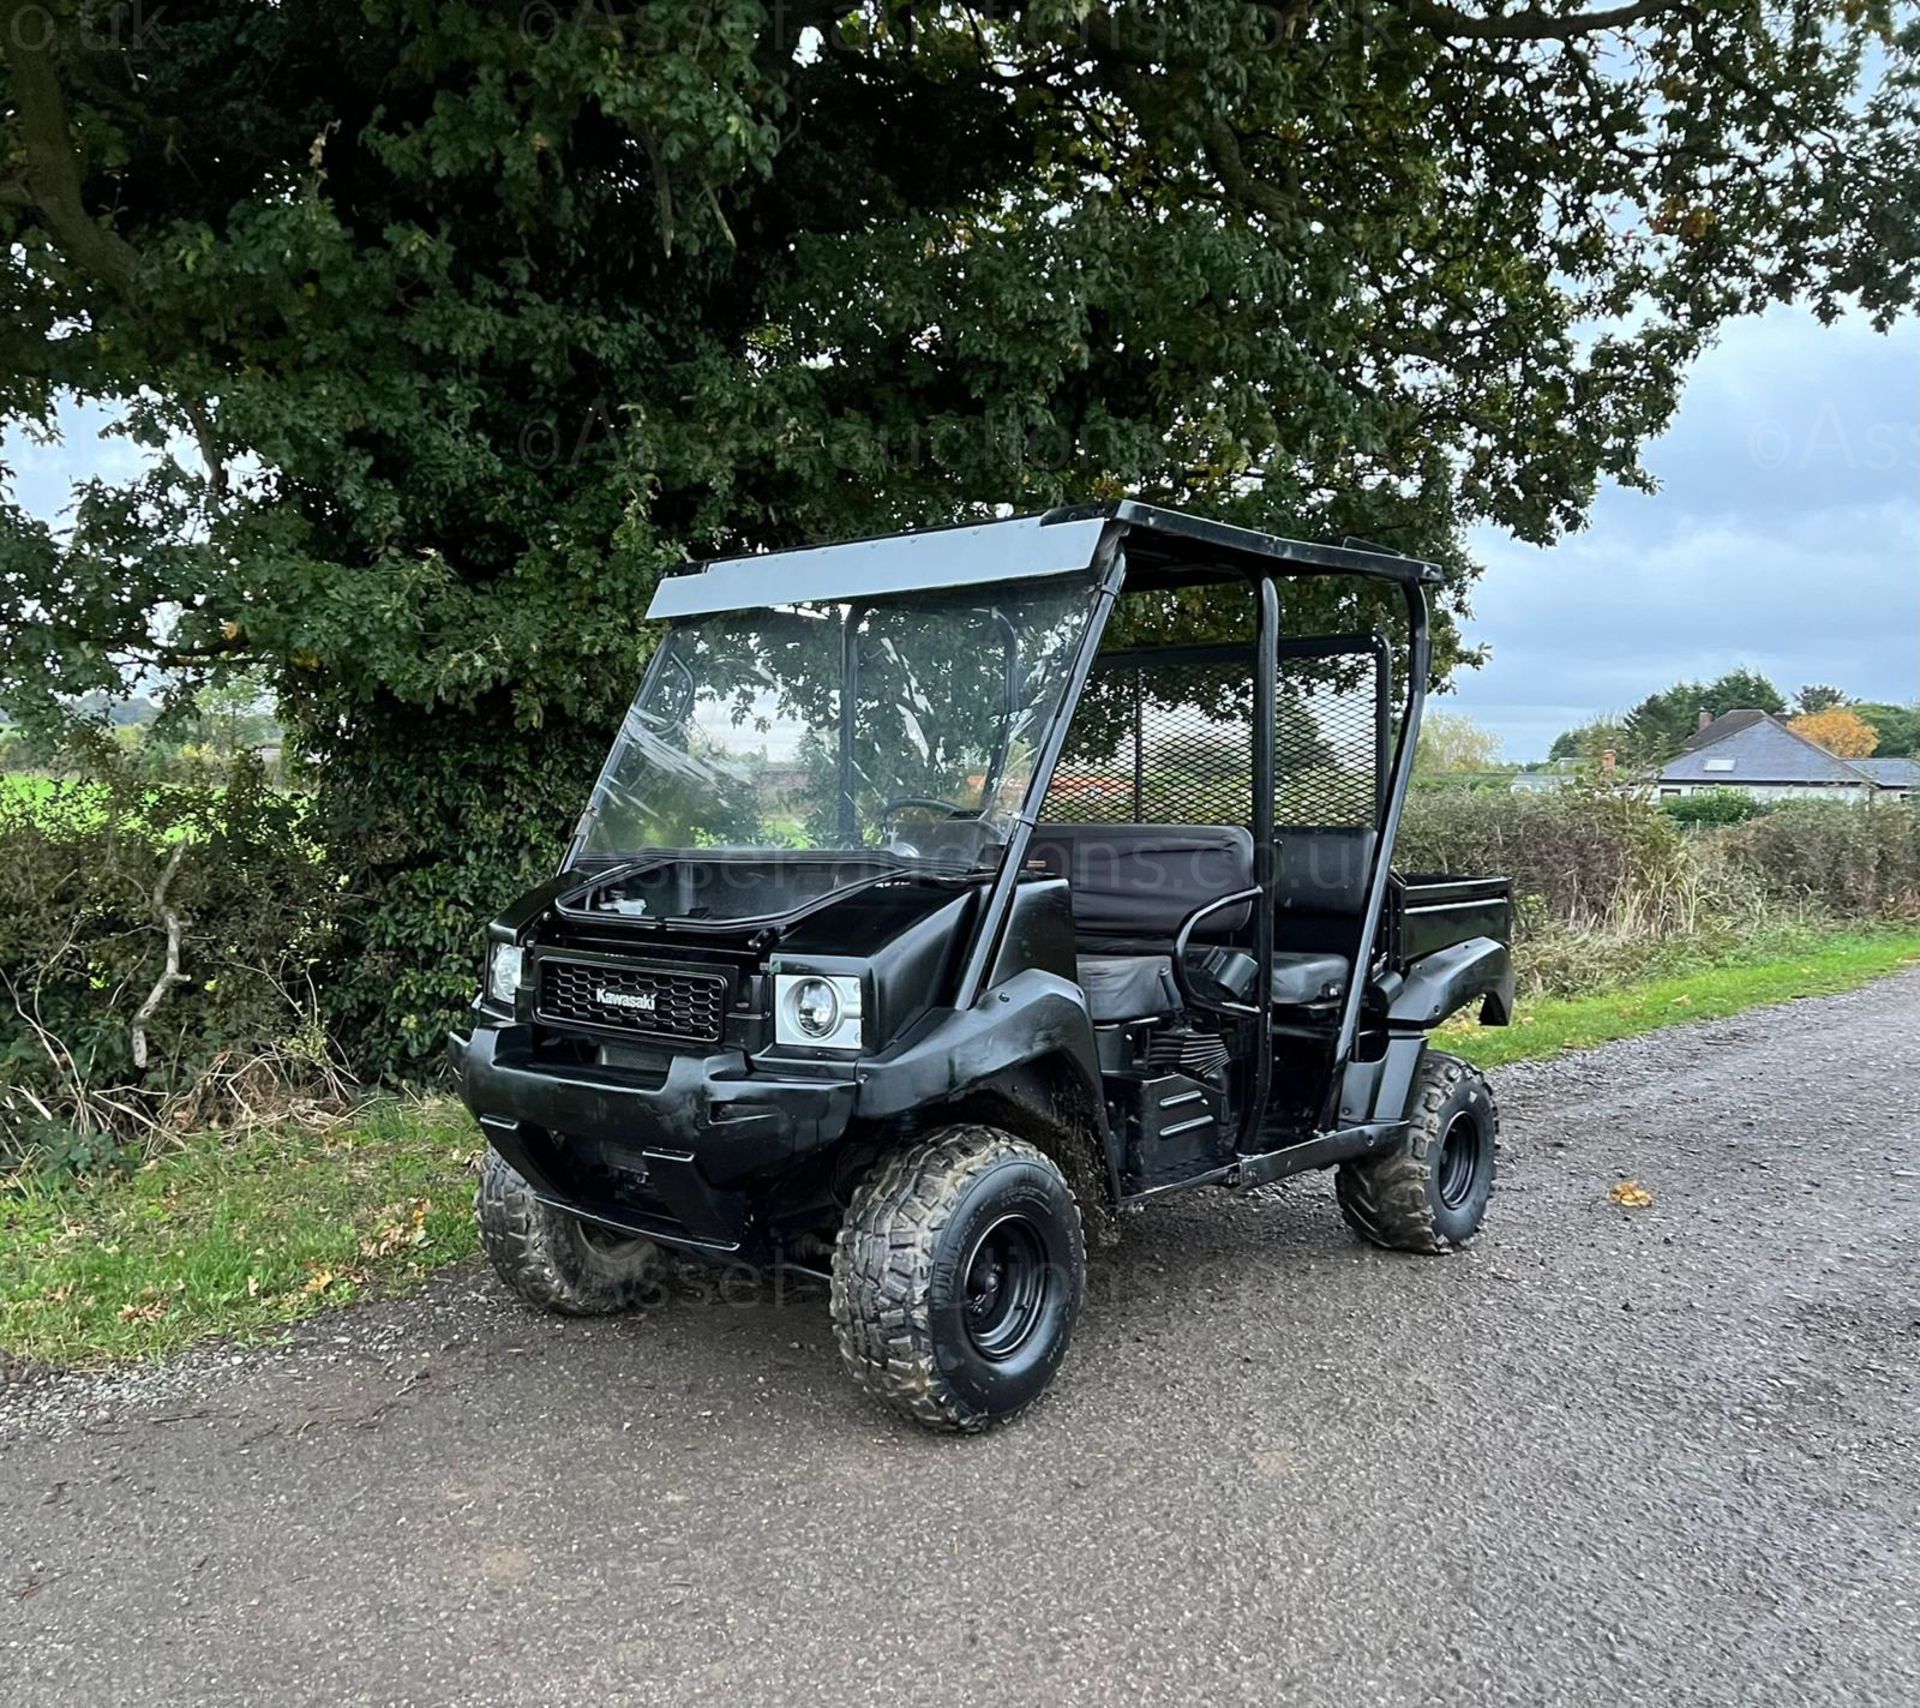 2011 KAWASAKI MULE 4010 4WD DIESEL BUGGI, RUNS AND DRIVES, SHOWING A LOW 2038 HOURS *PLUS VAT* - Image 3 of 19